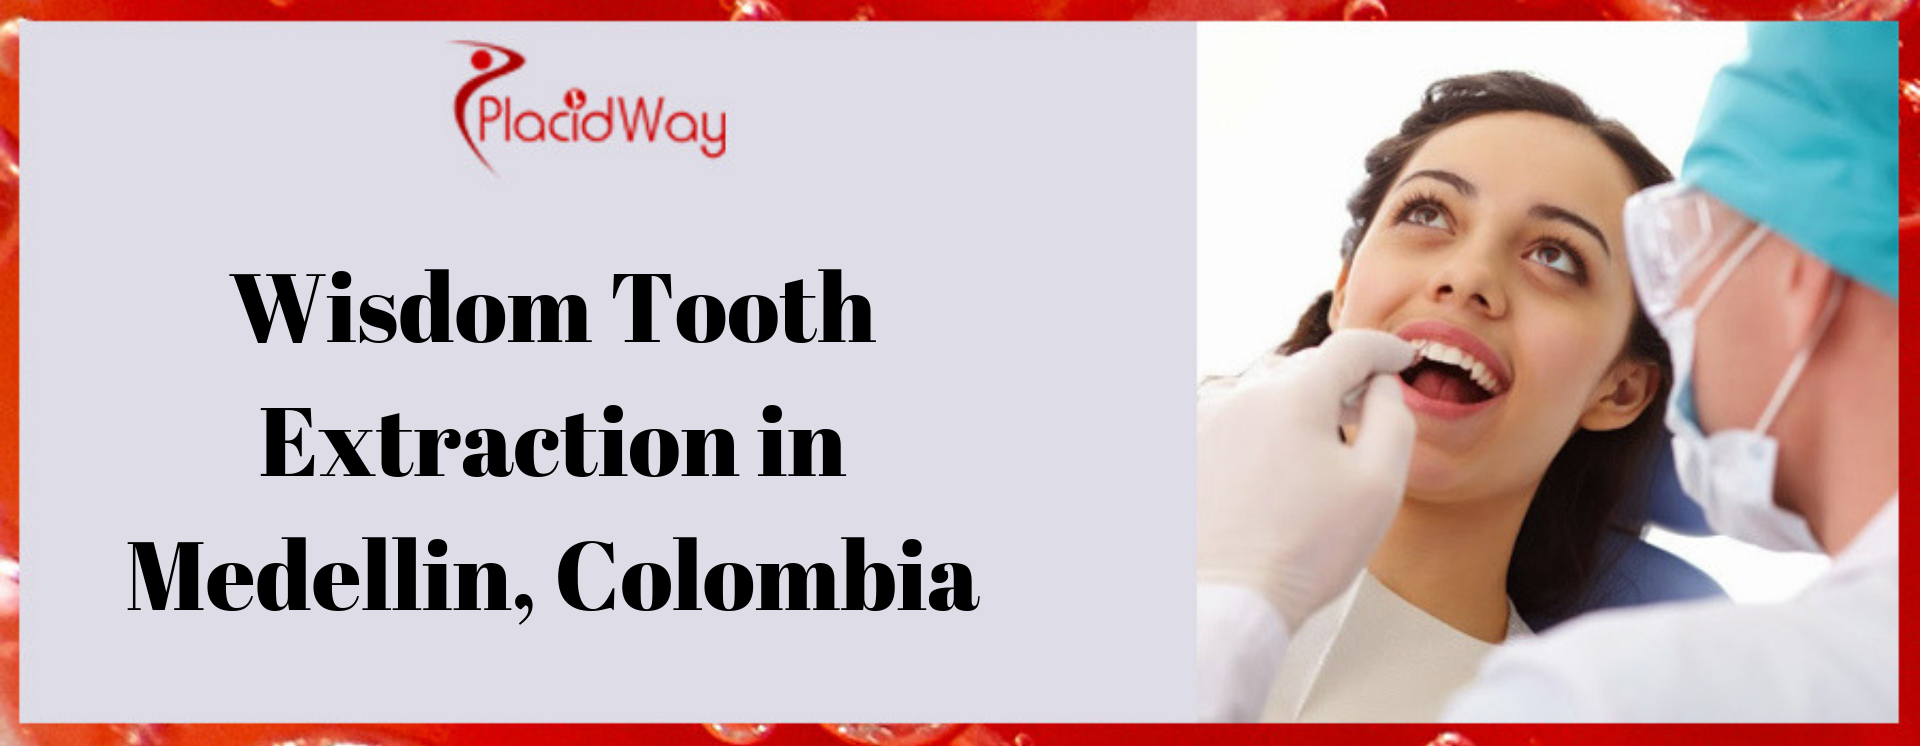 Wisdom Tooth Extraction in Medellin, Colombia